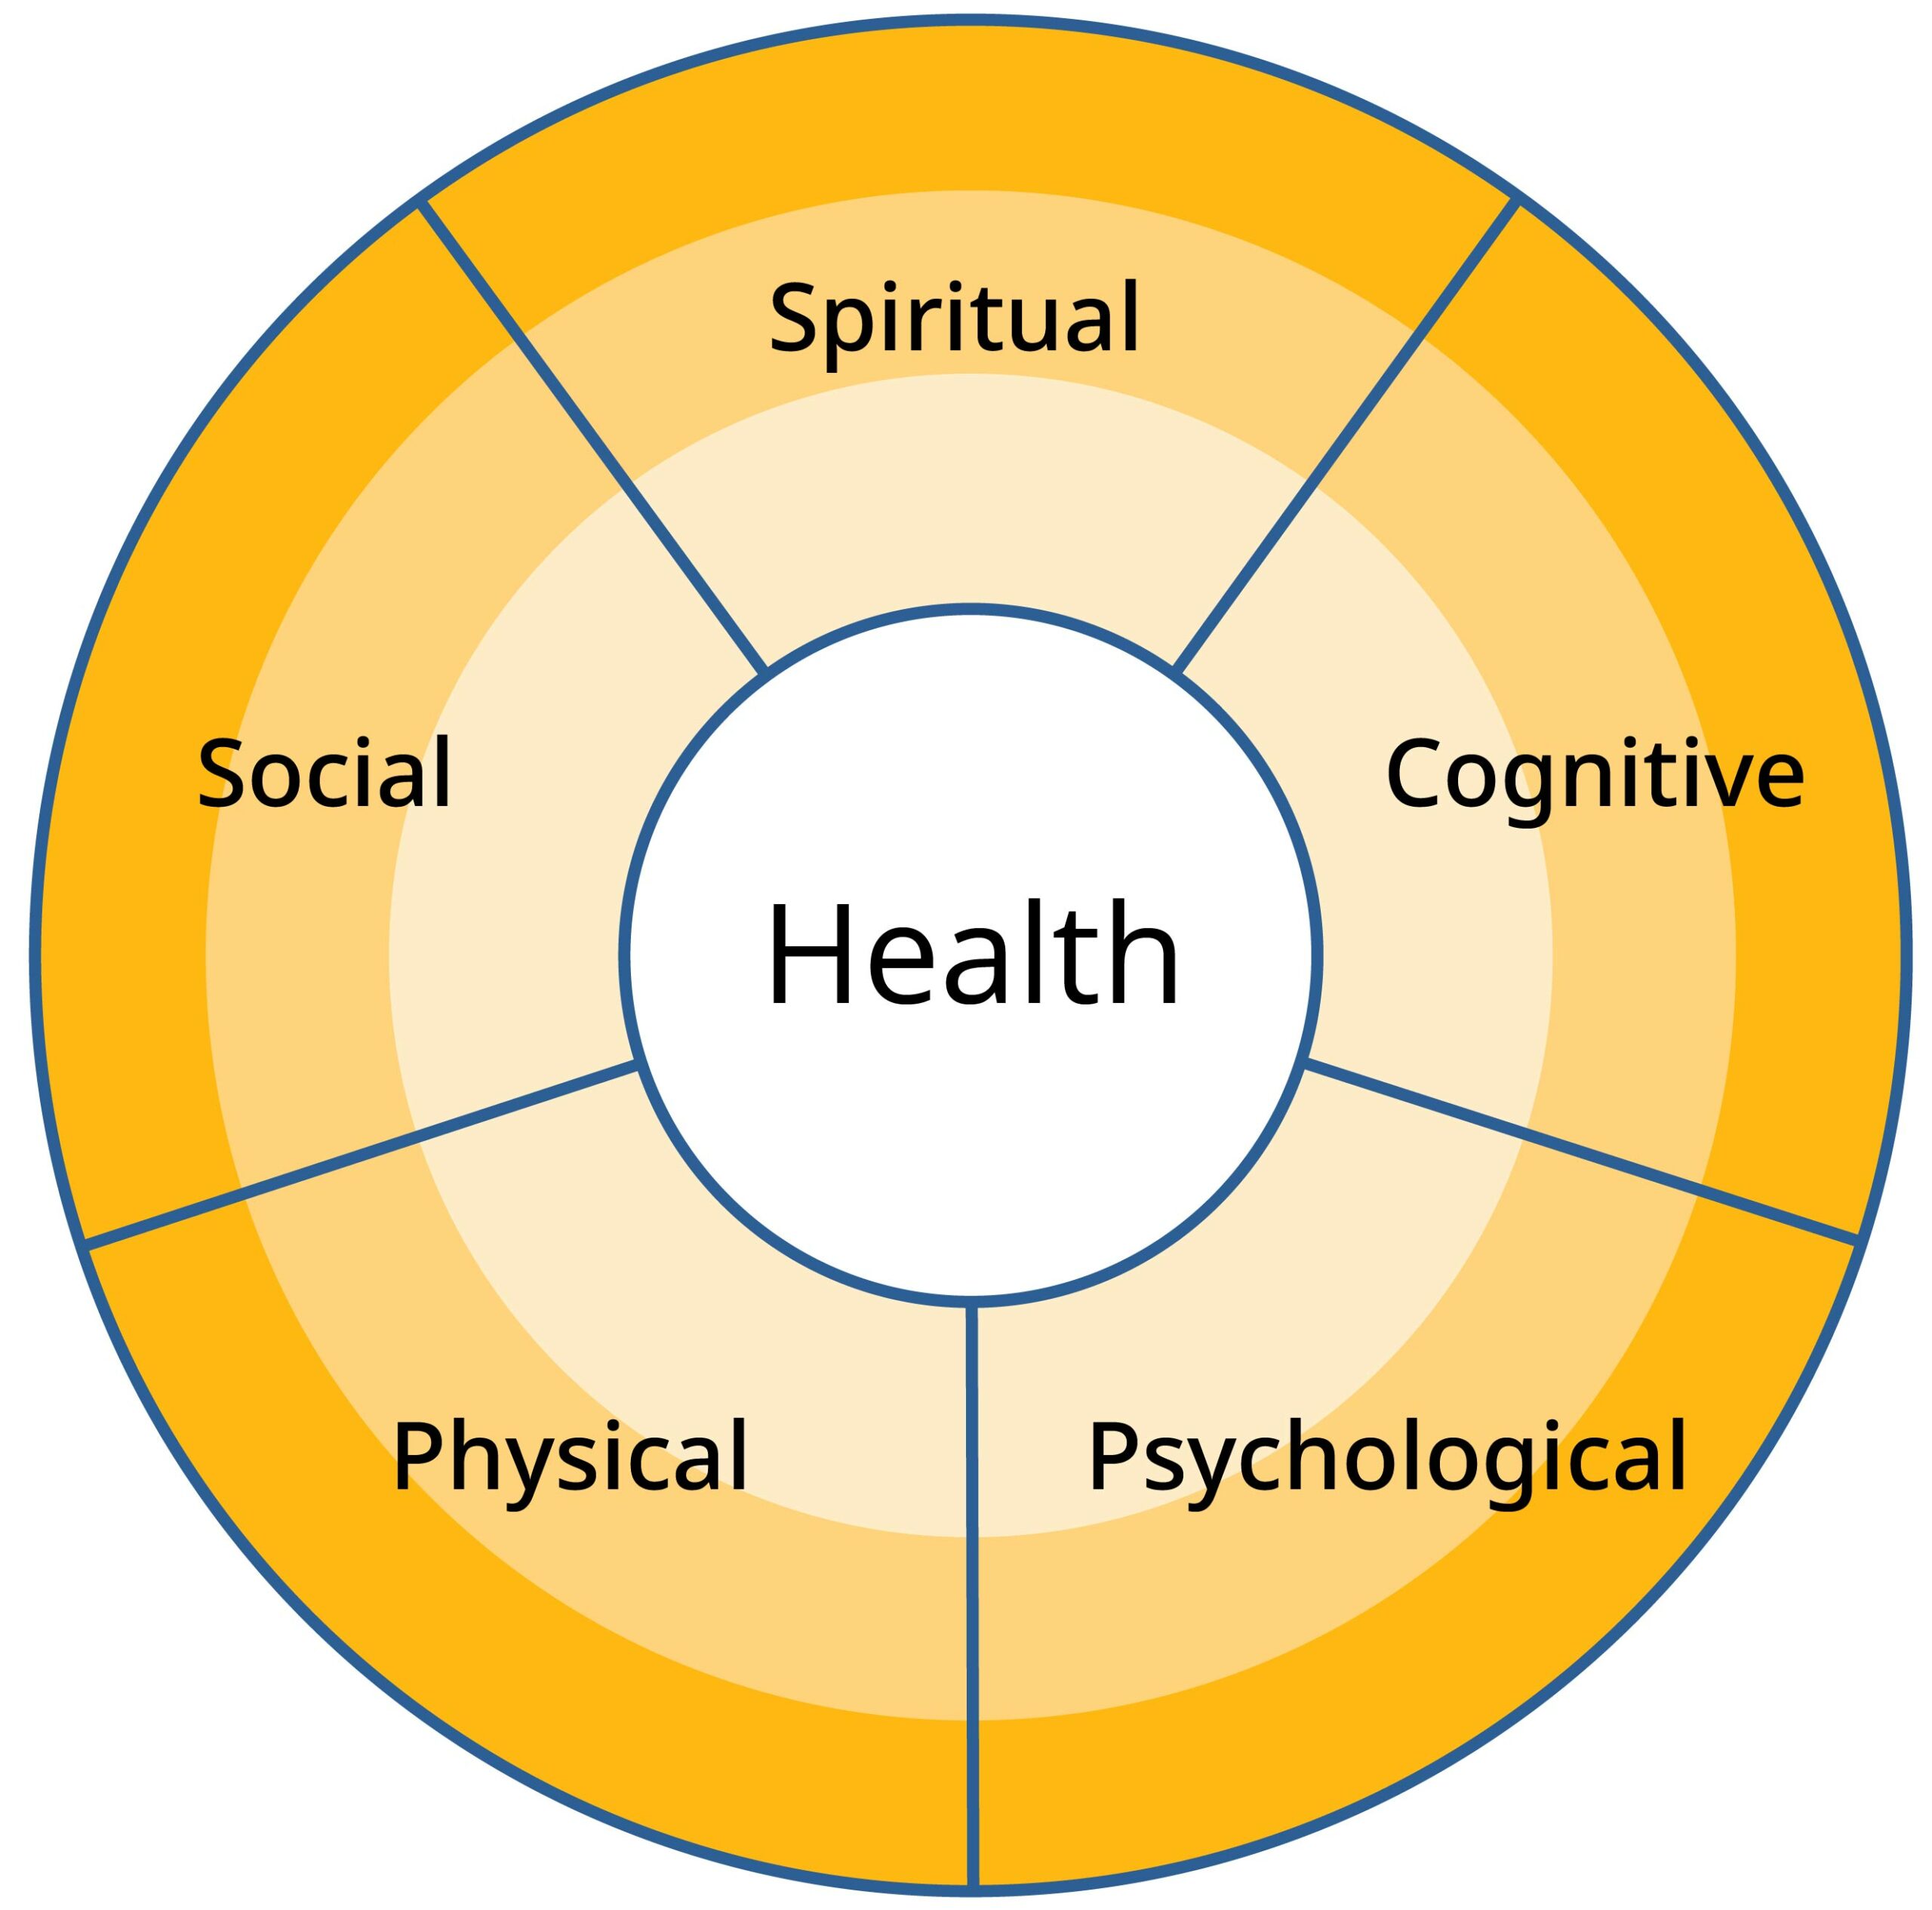 a health wheel consisted of dimensions of physical, psychological, cognitive, social and spiritual